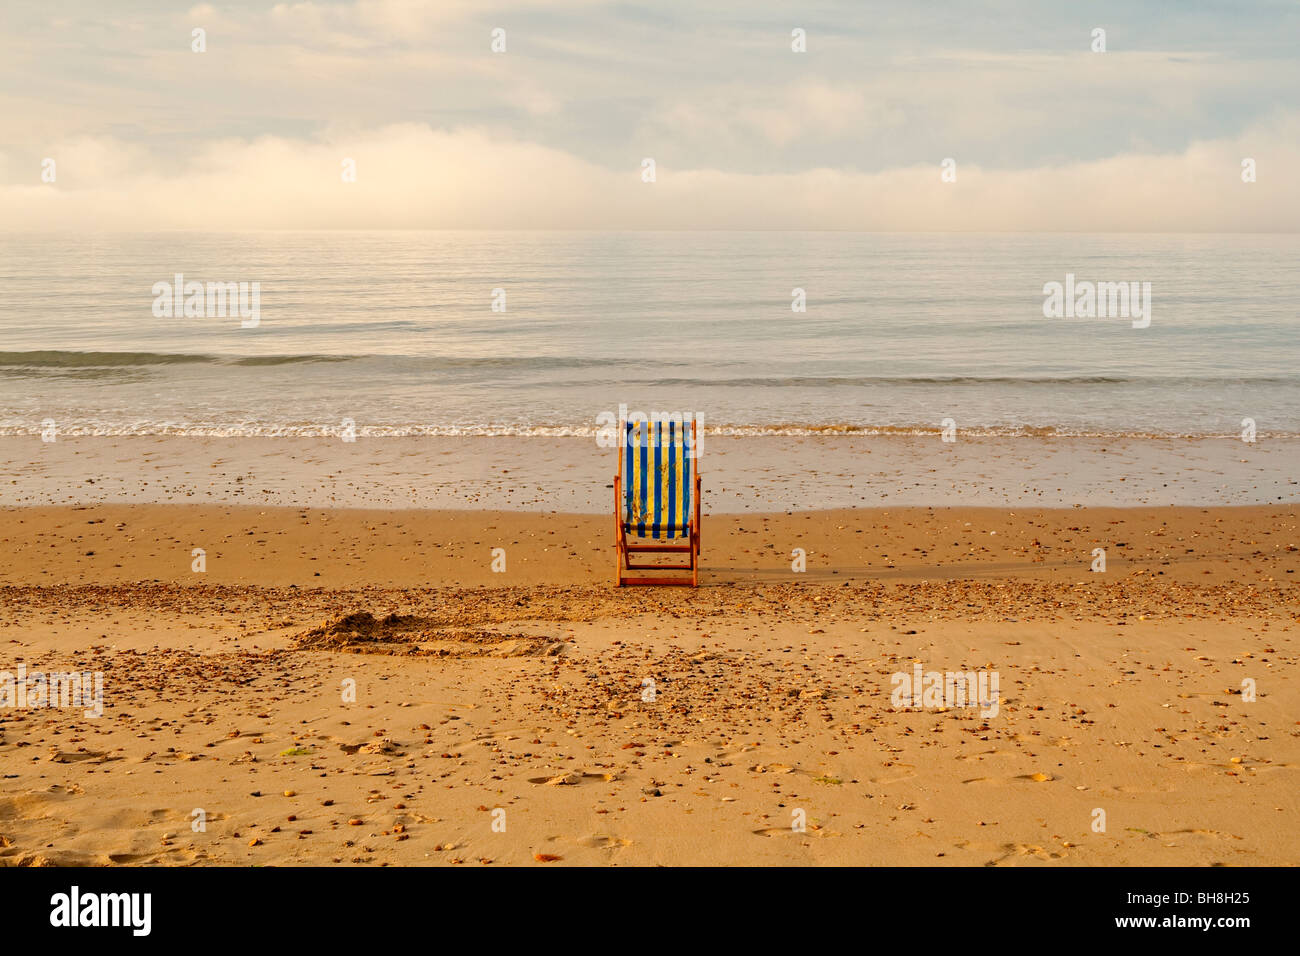 View of the sandy beach and abandoned striped wooden deckchair at Bournemouth in Dorset in south west England UK Stock Photo